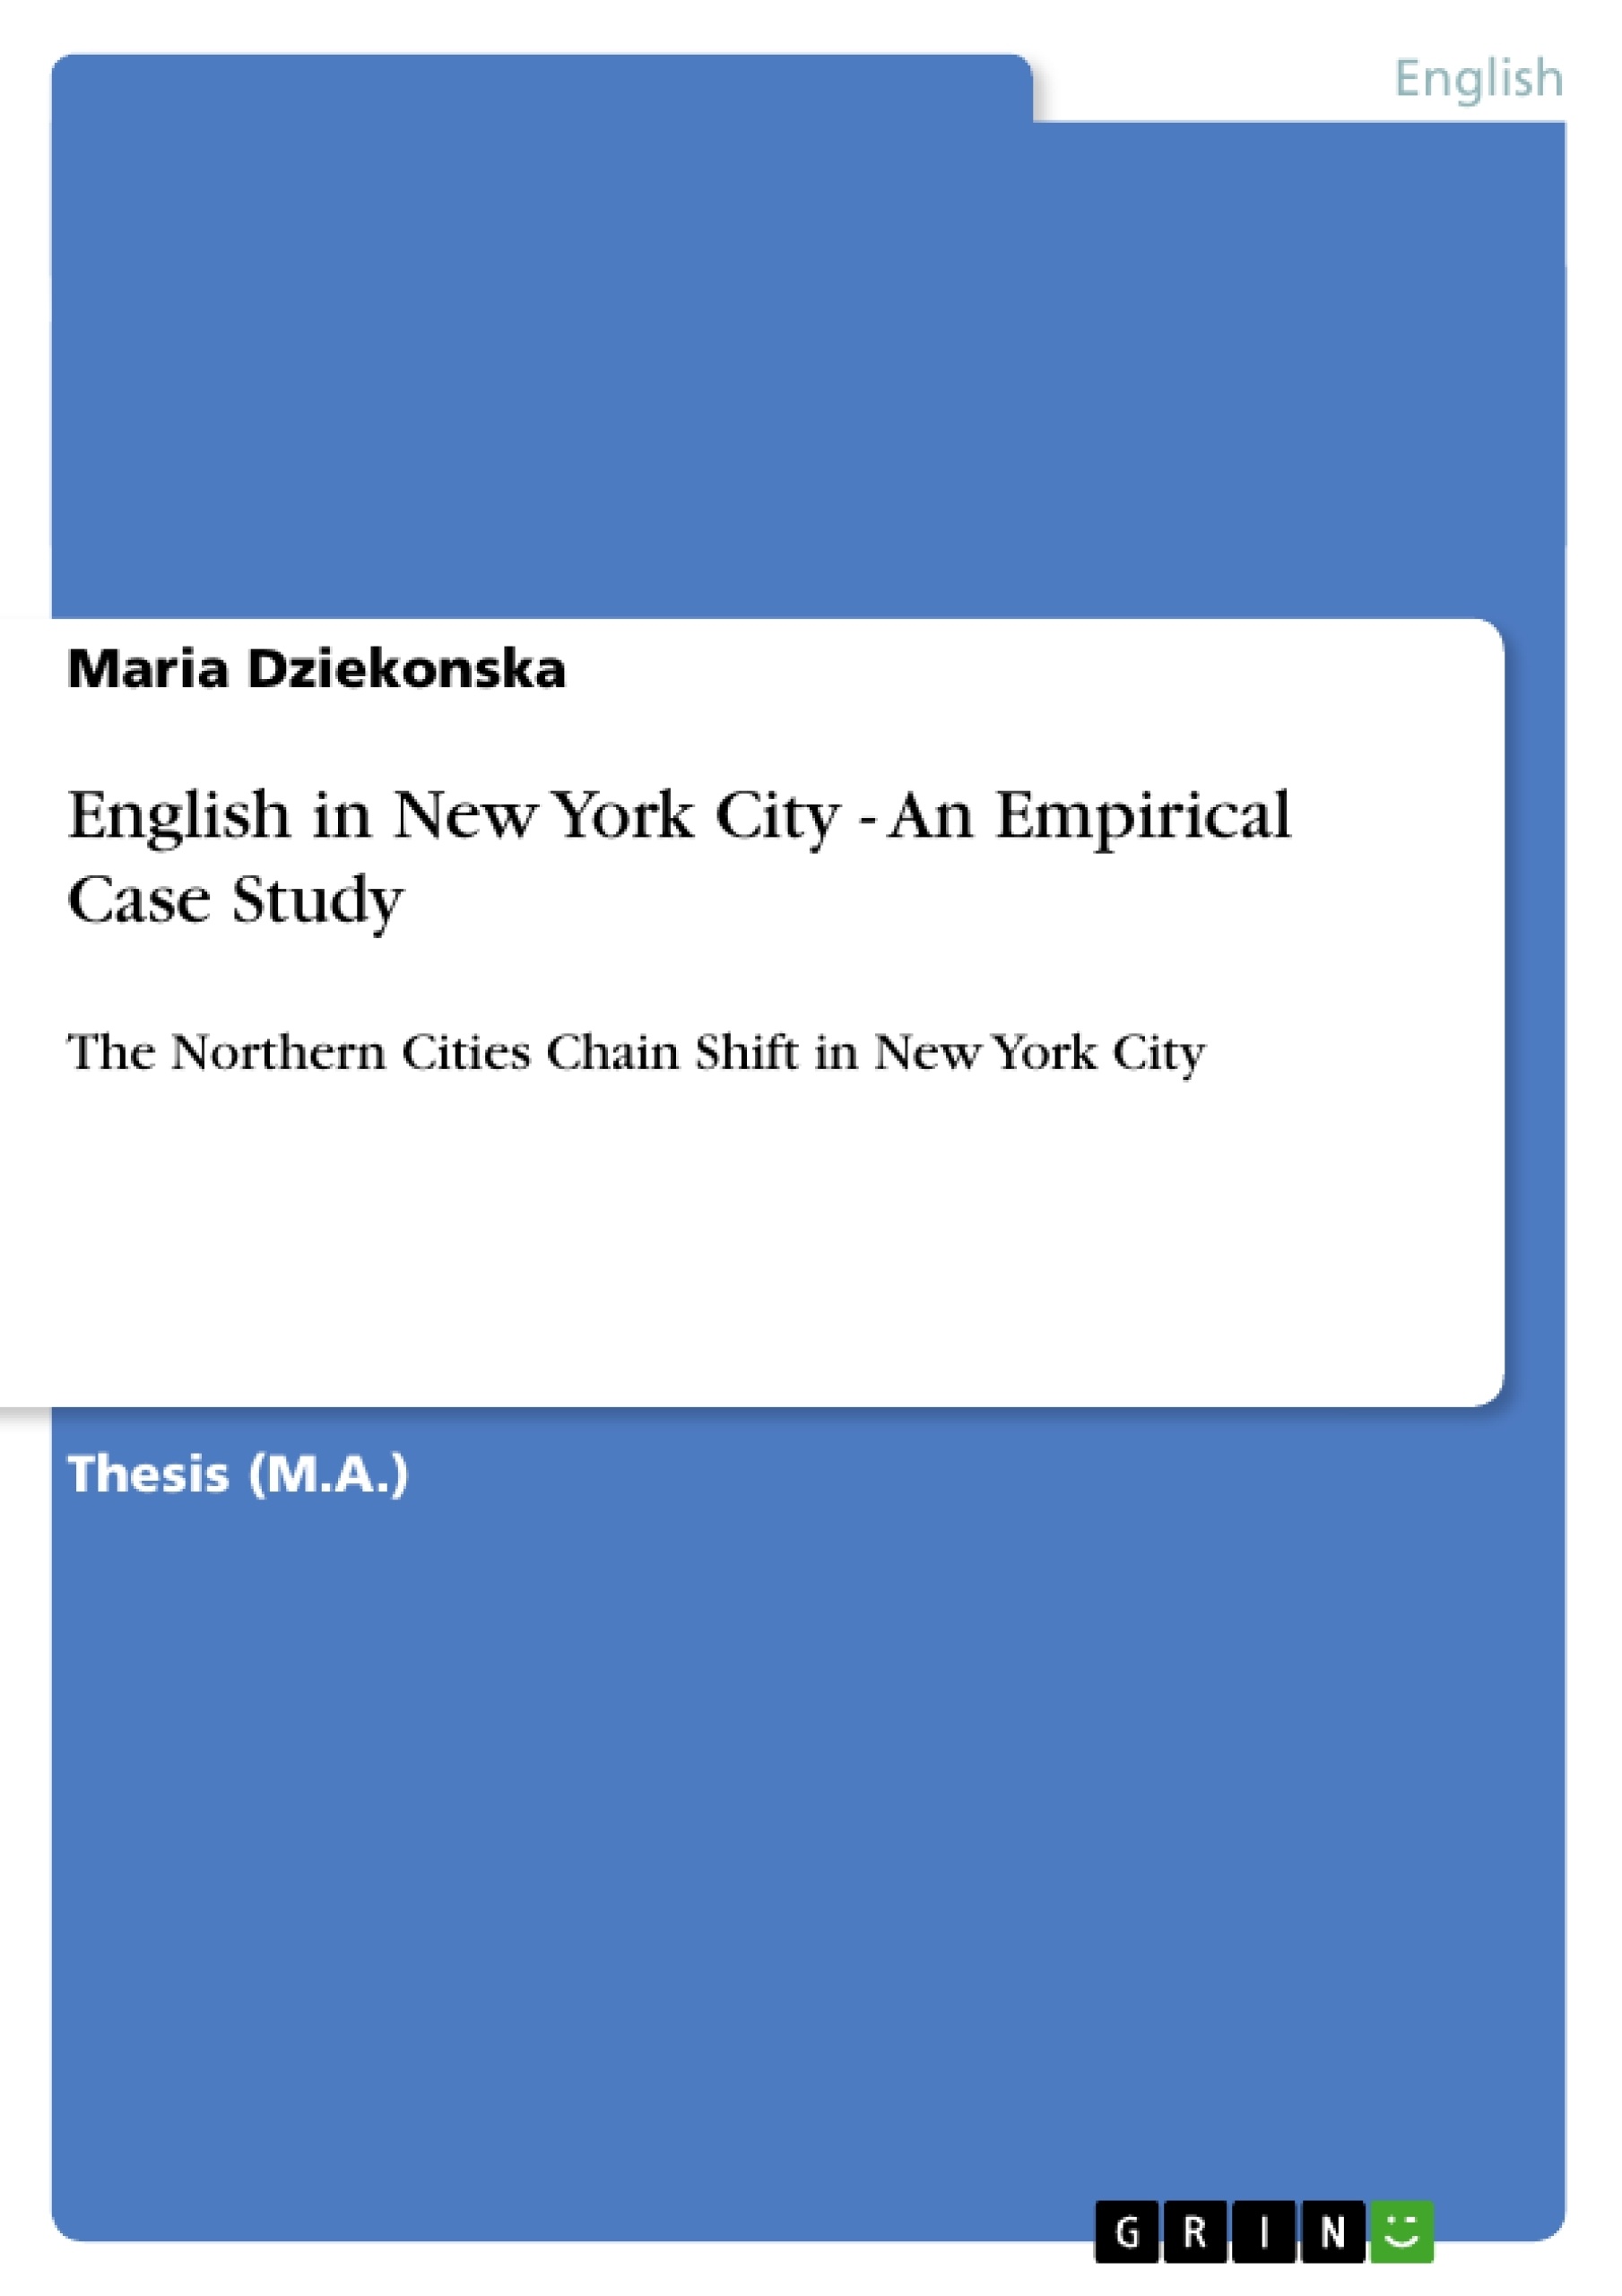 Title: English in New York City - An Empirical Case Study